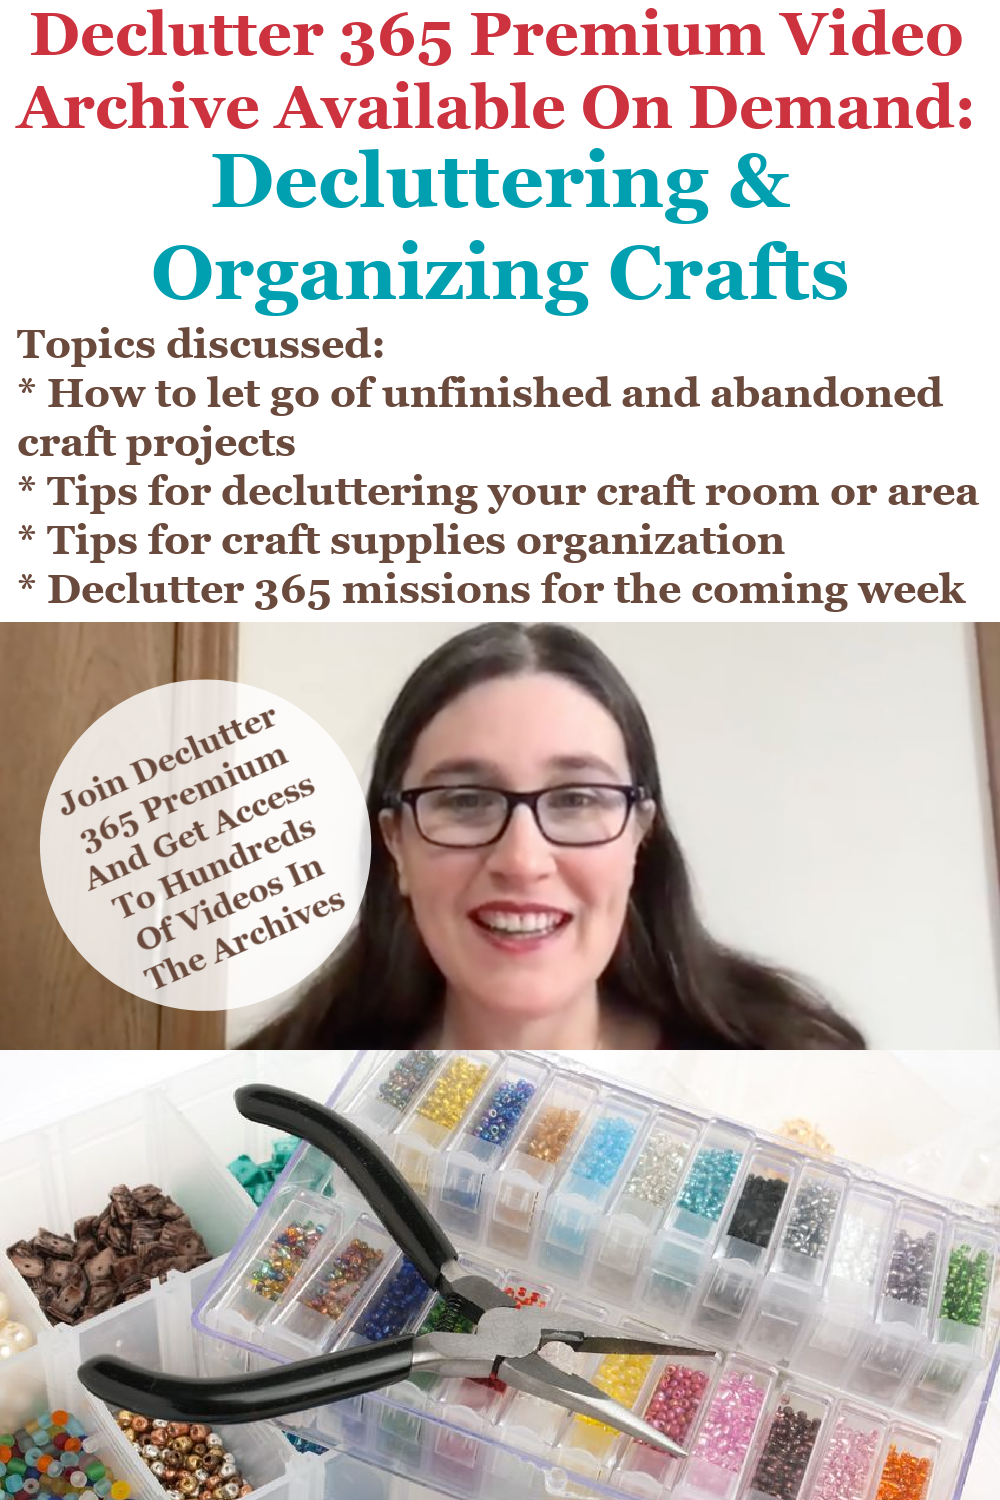 Declutter 365 Premium video archive available on demand all about decluttering and organizing your crafts, on Home Storage Solutions 101